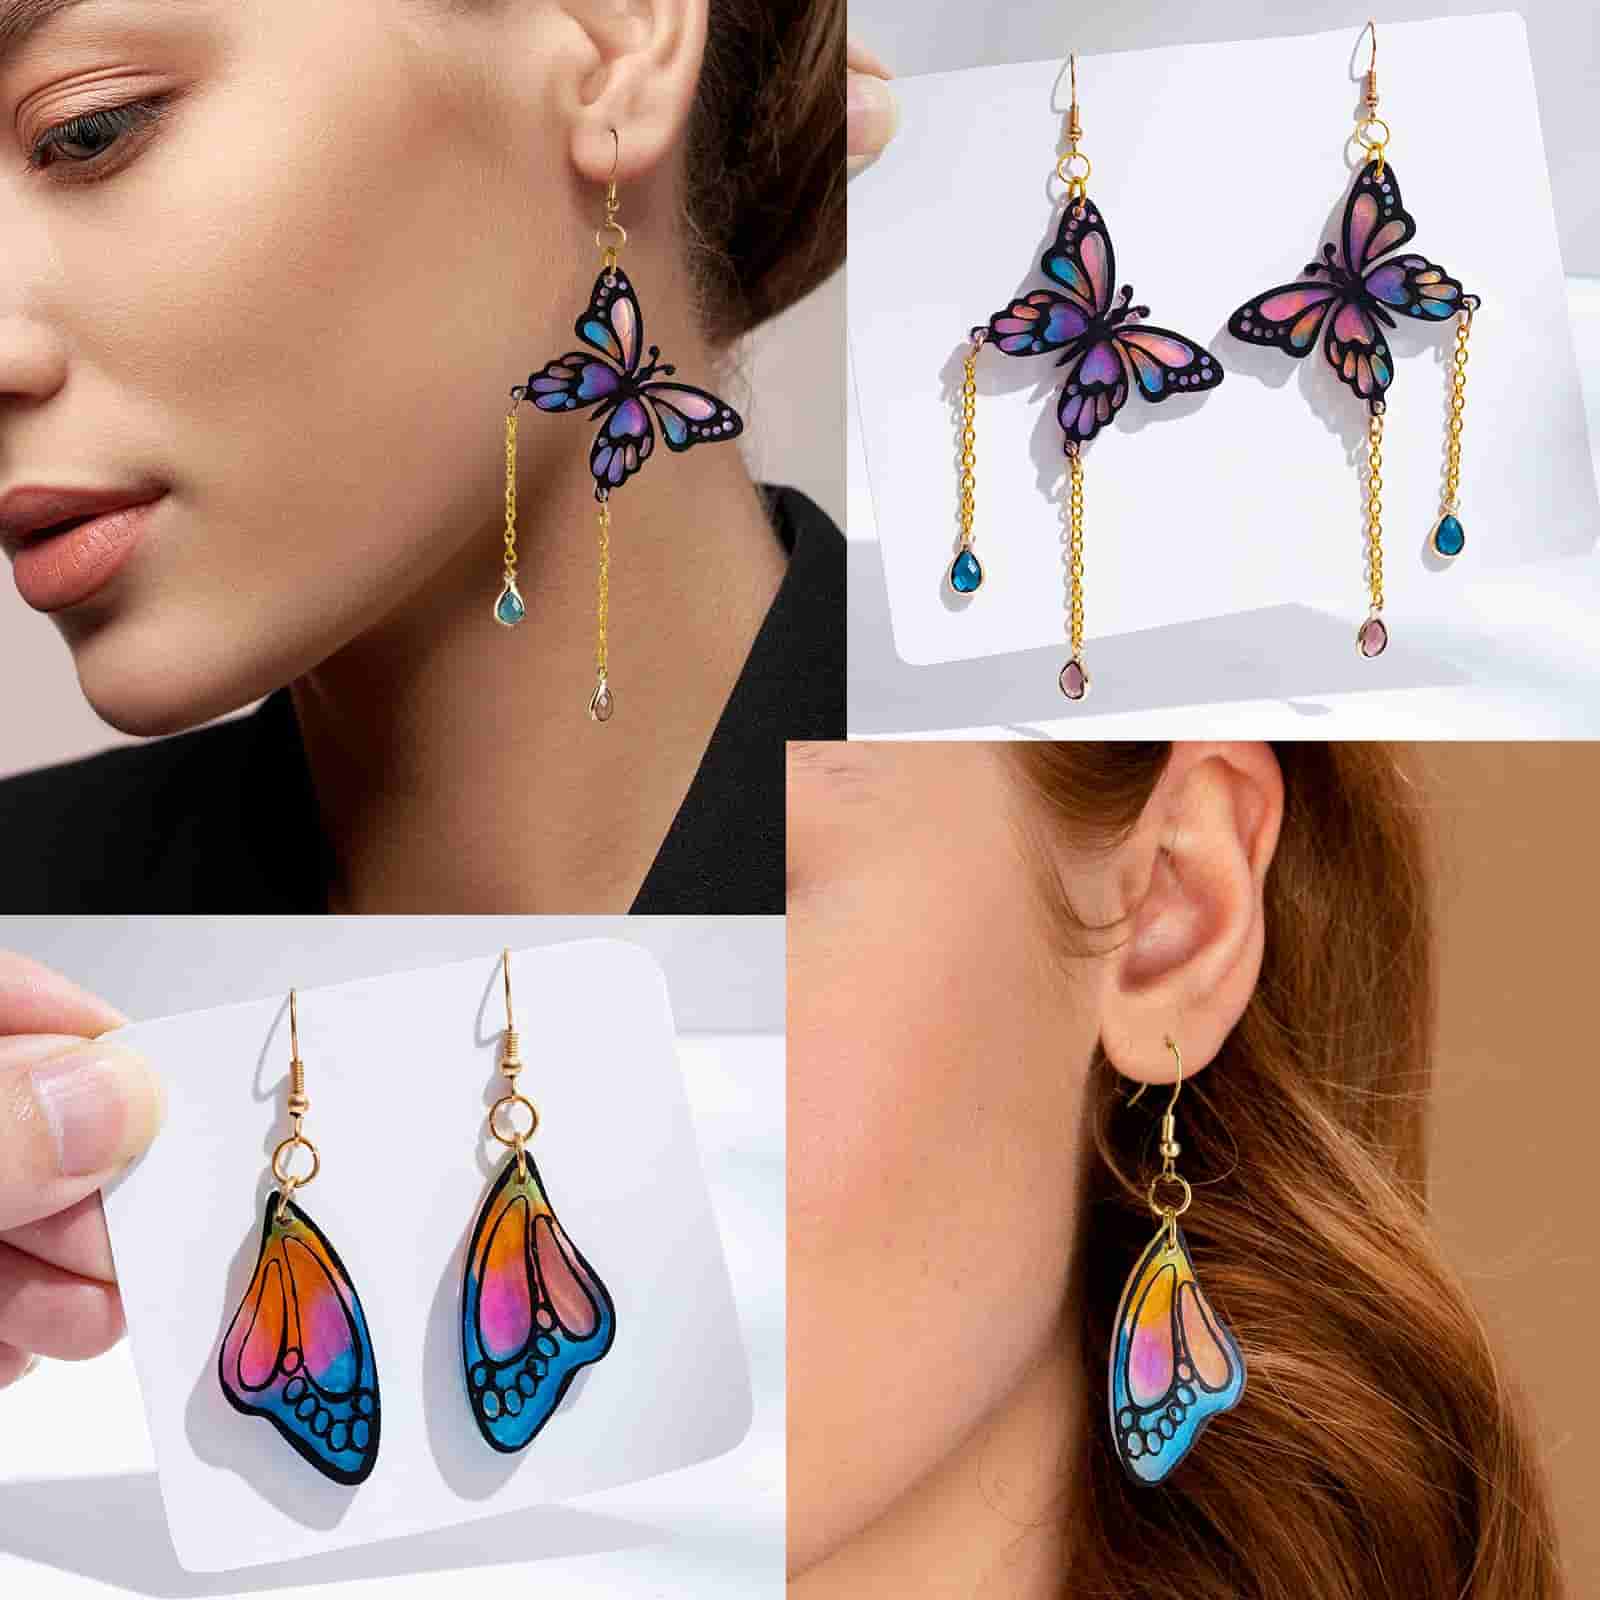 2 pairs of butterfly earrings with color gradient designs